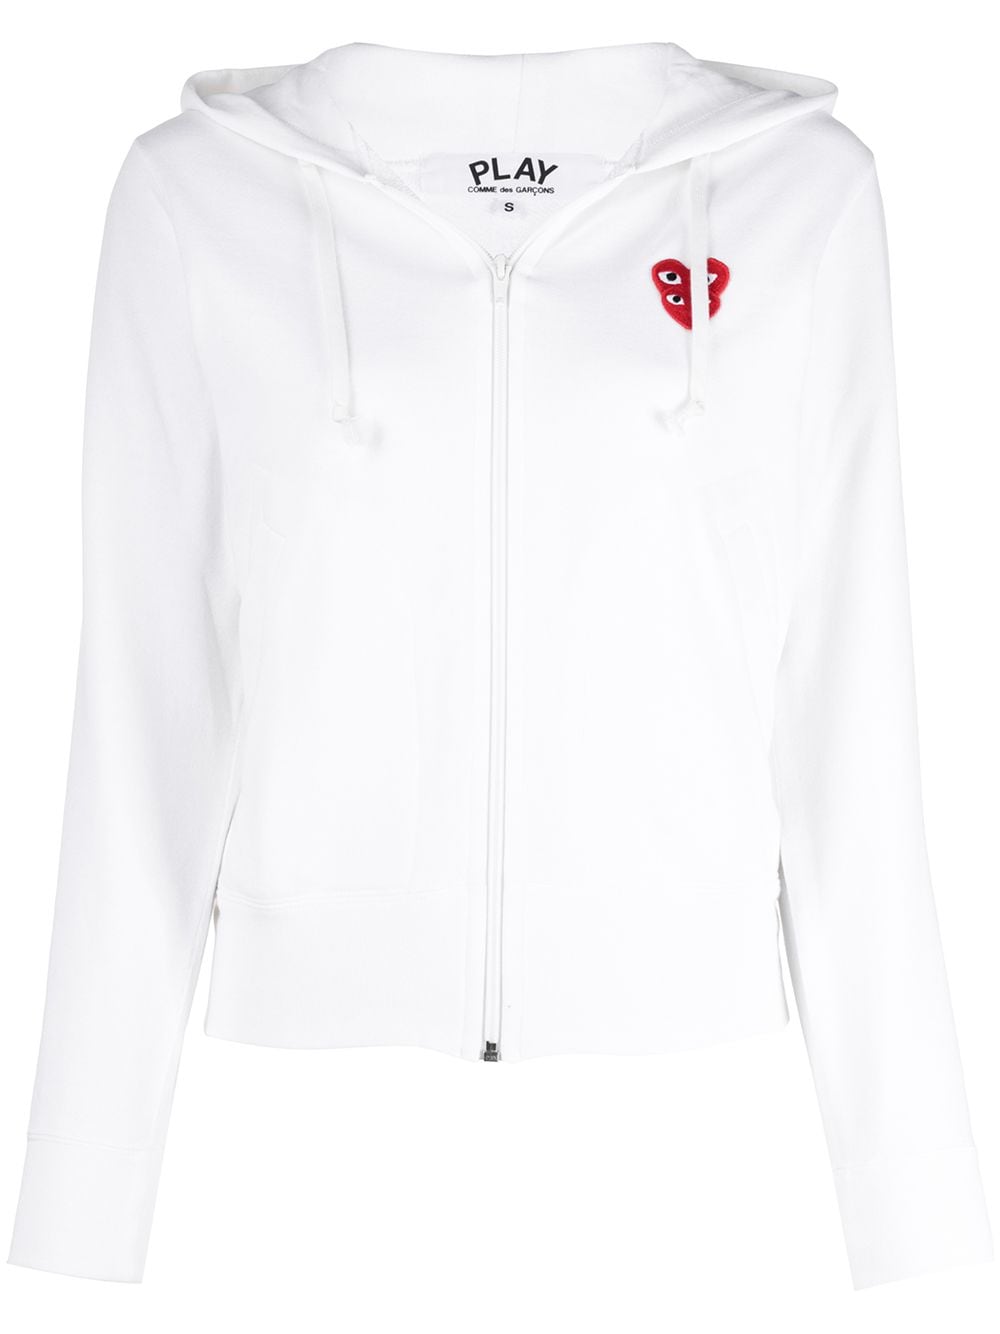 Comme Des Garçons Play cropped overlapping logo hoodie - White von Comme Des Garçons Play